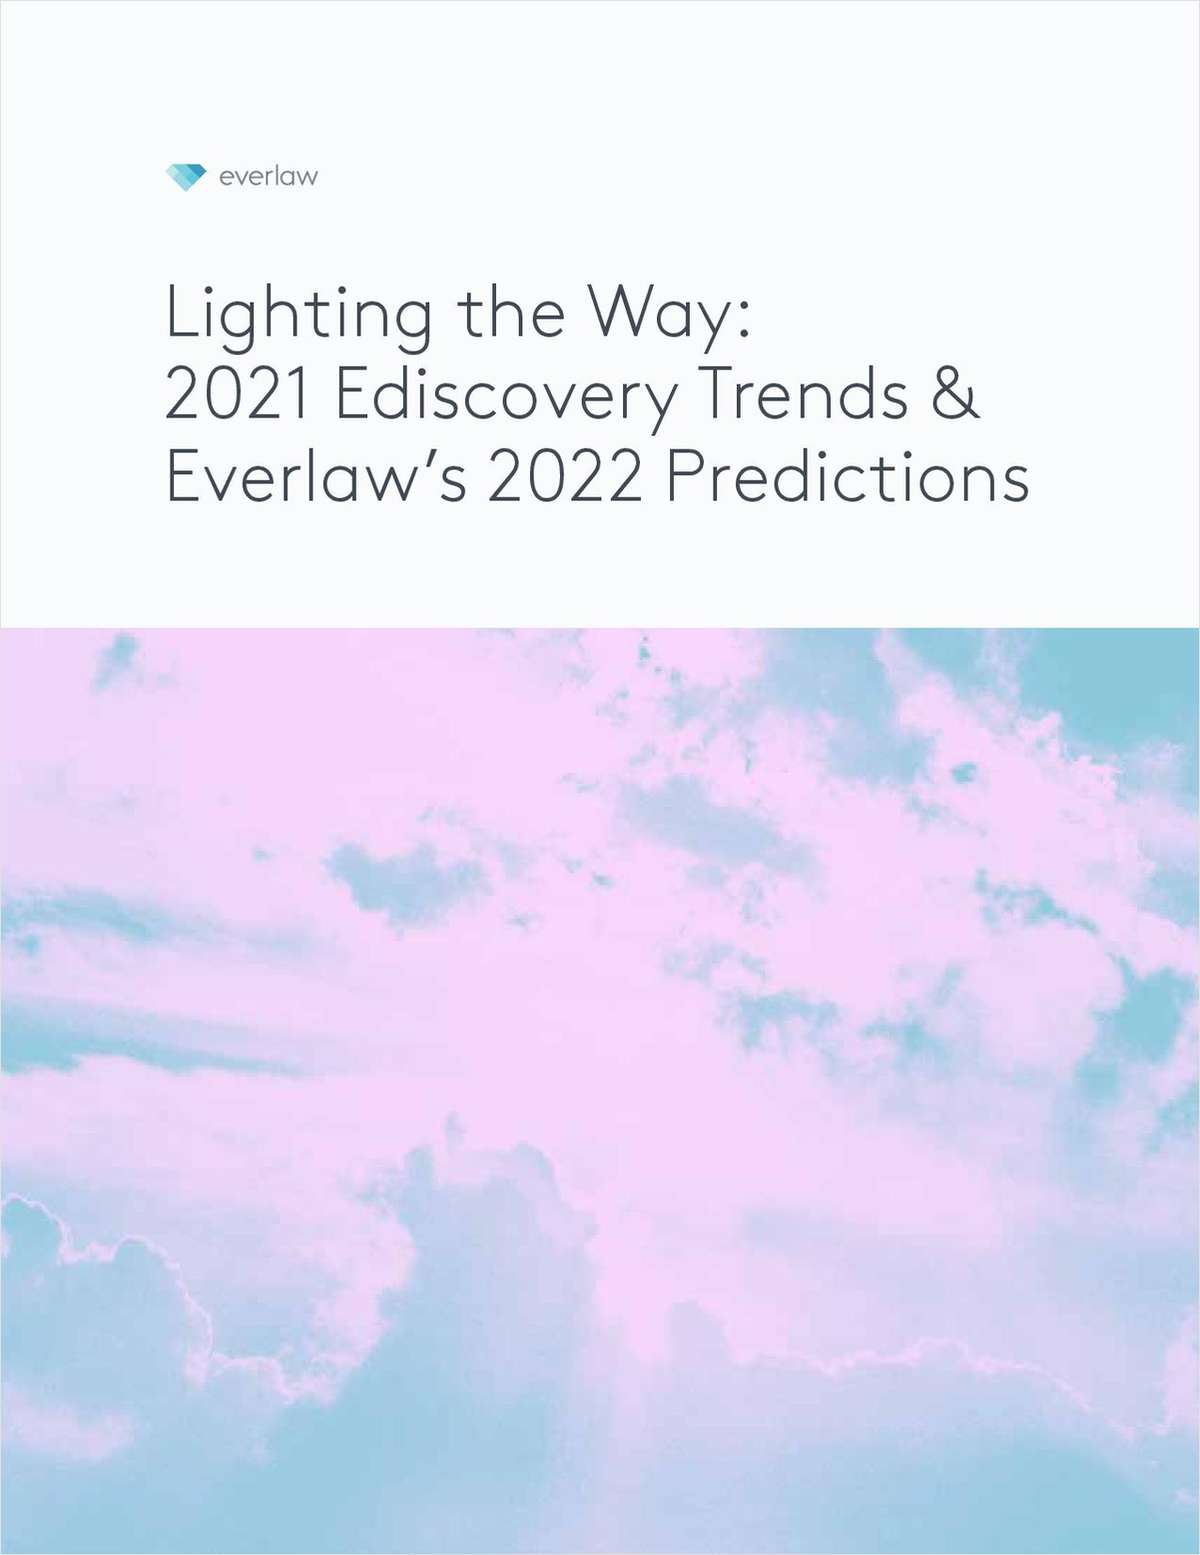 The day-to-day for modern legal professionals has changed dramatically this past year, and the legal industry has no choice but to adapt. This white paper explores the ediscovery trends that shaped 2021, how it impacted legal work and predictions for the year ahead.